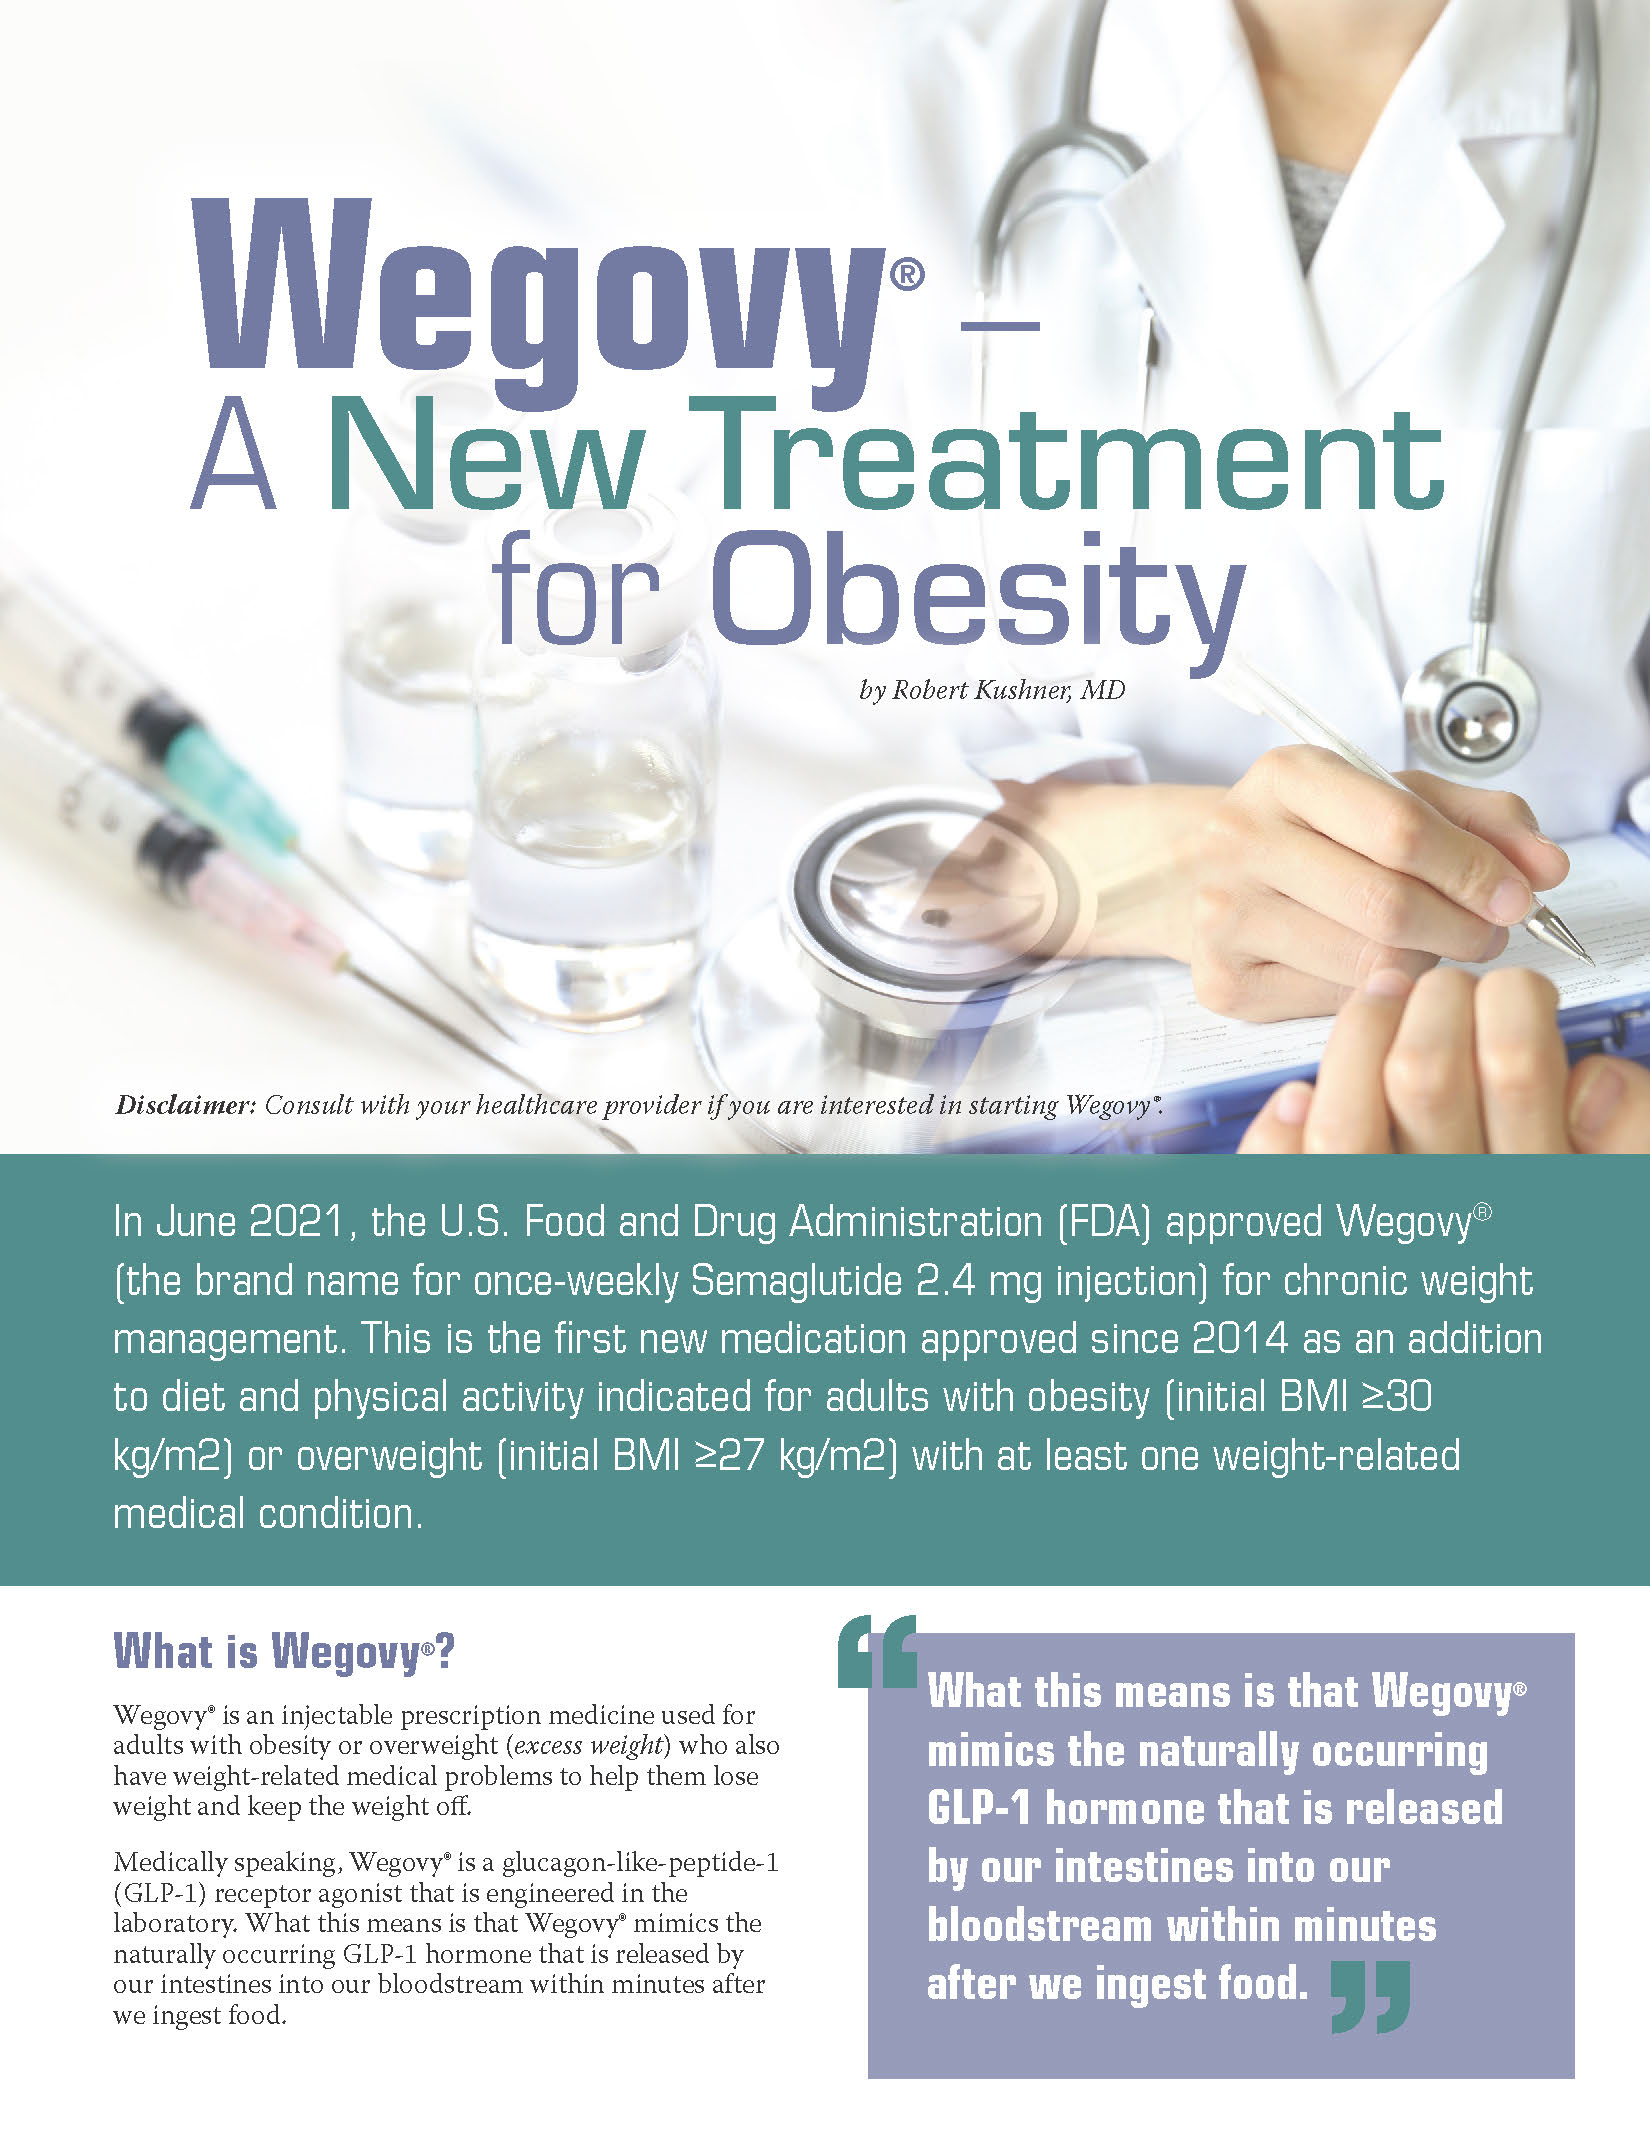 https://www.obesityaction.org/wp-content/uploads/Pages-from-Wegovy.jpg